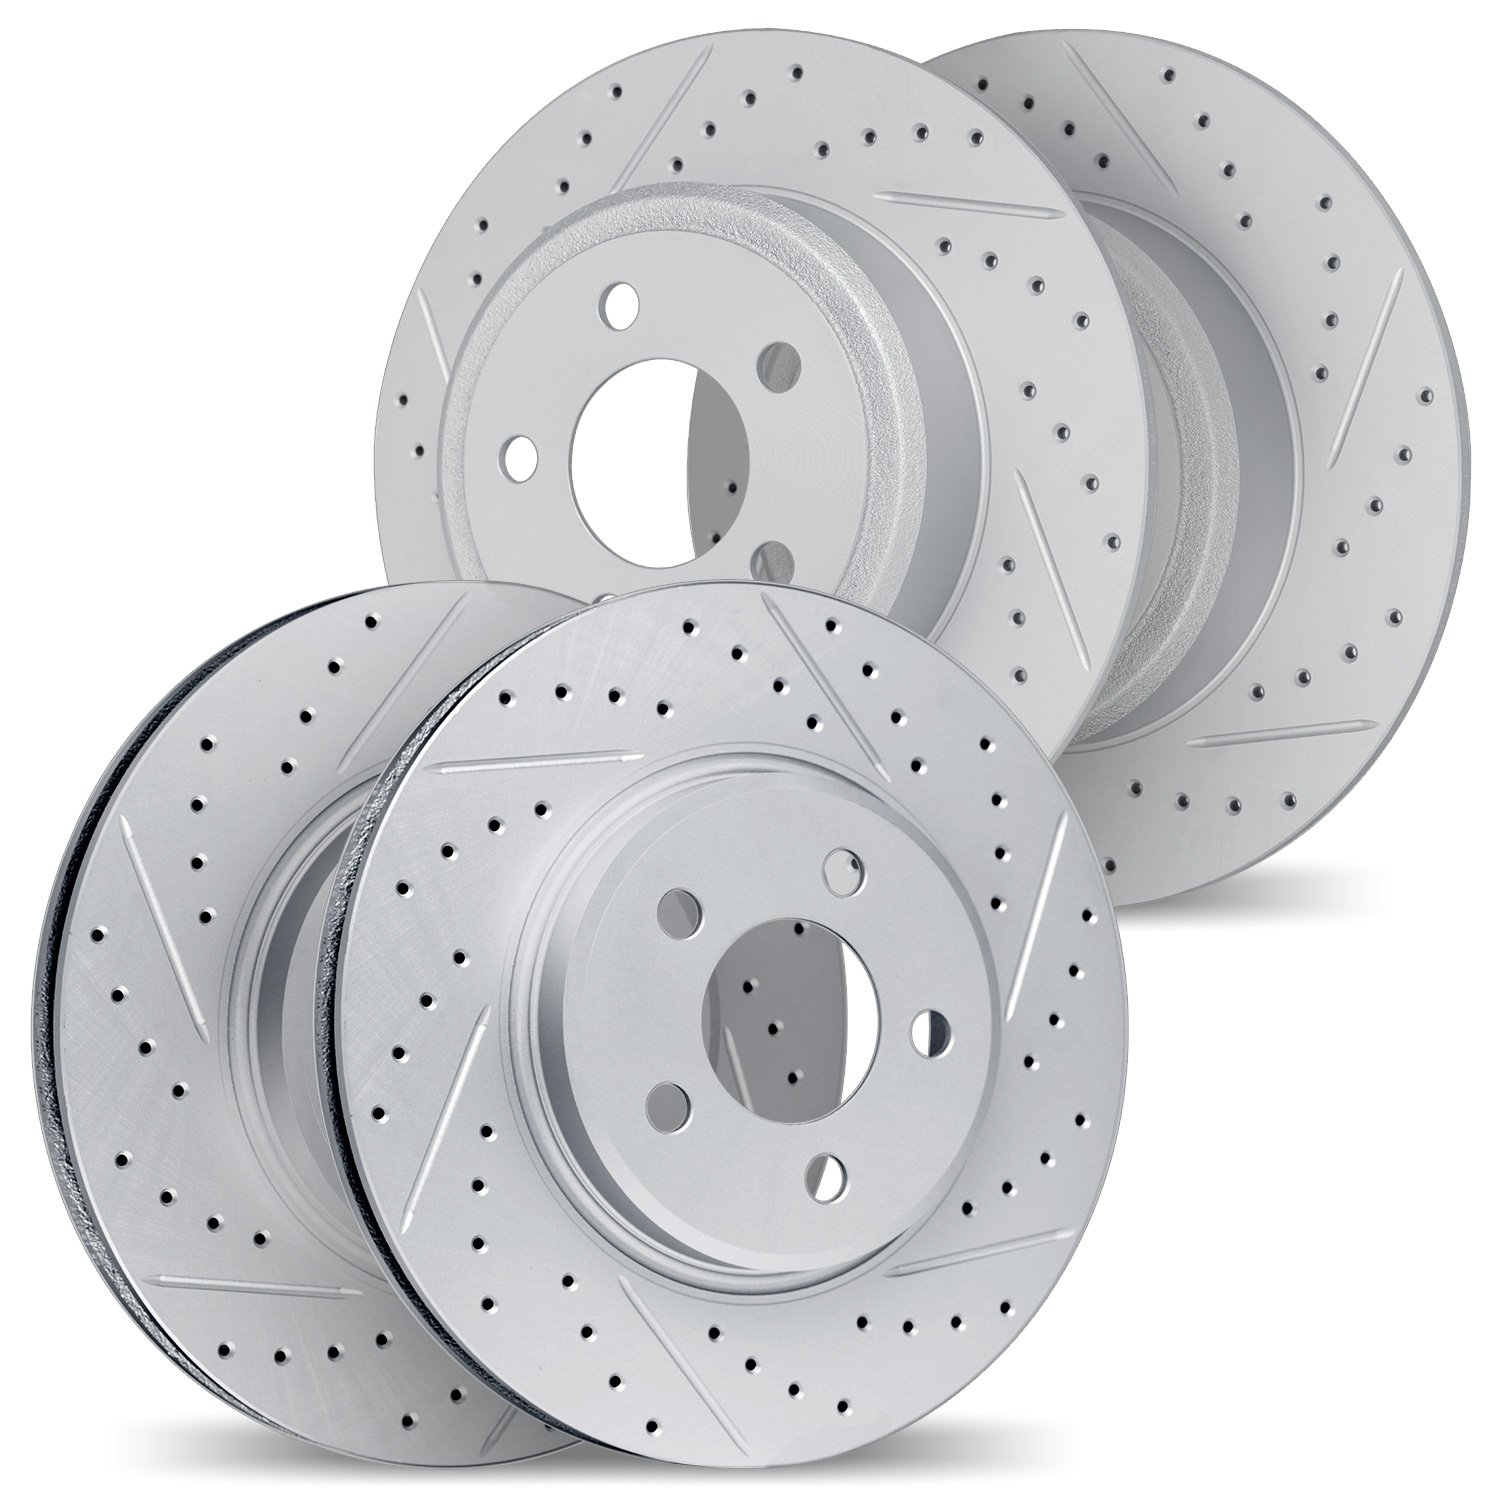 2004-59068 Geoperformance Drilled/Slotted Brake Rotors, Fits Select Acura/Honda, Position: Front and Rear